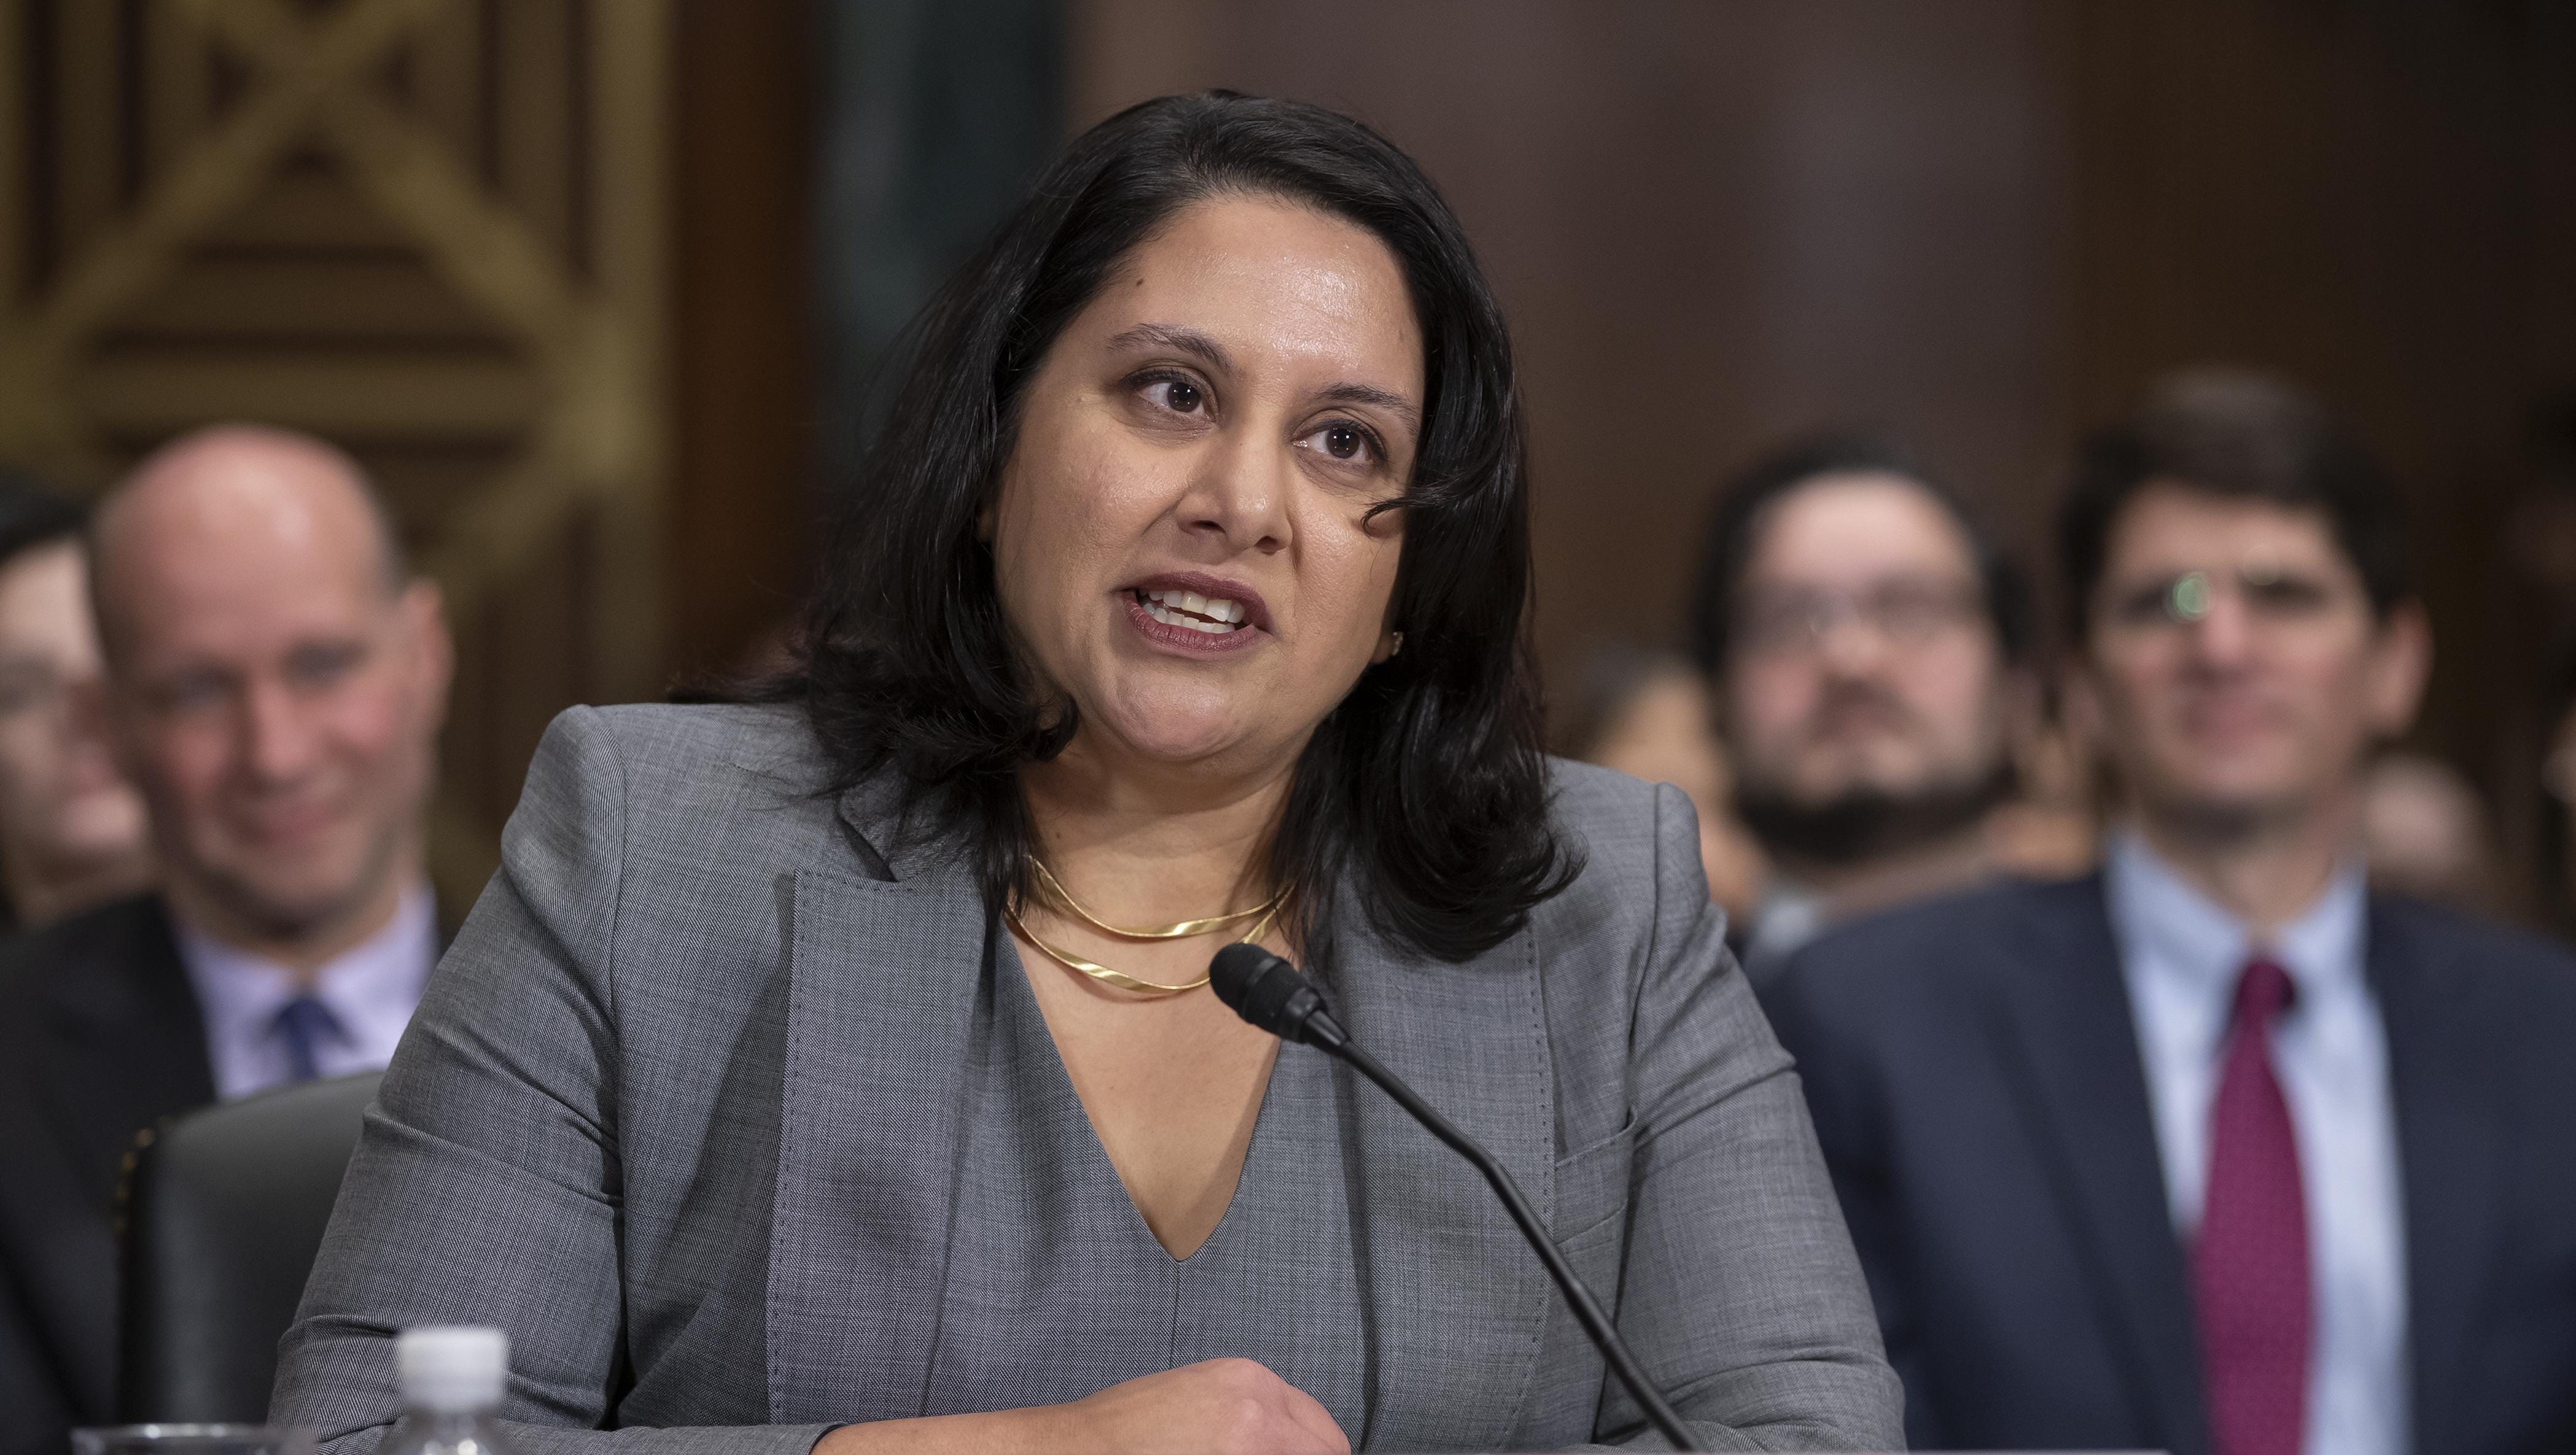 Neomi Rao, President Donald Trump's nominee for a seat on the D.C. Circuit Court of Appeals, appears before the Senate Judiciary Committee for her confirmation hearing, on Capitol Hill in Washington, Feb. 5, 2019.